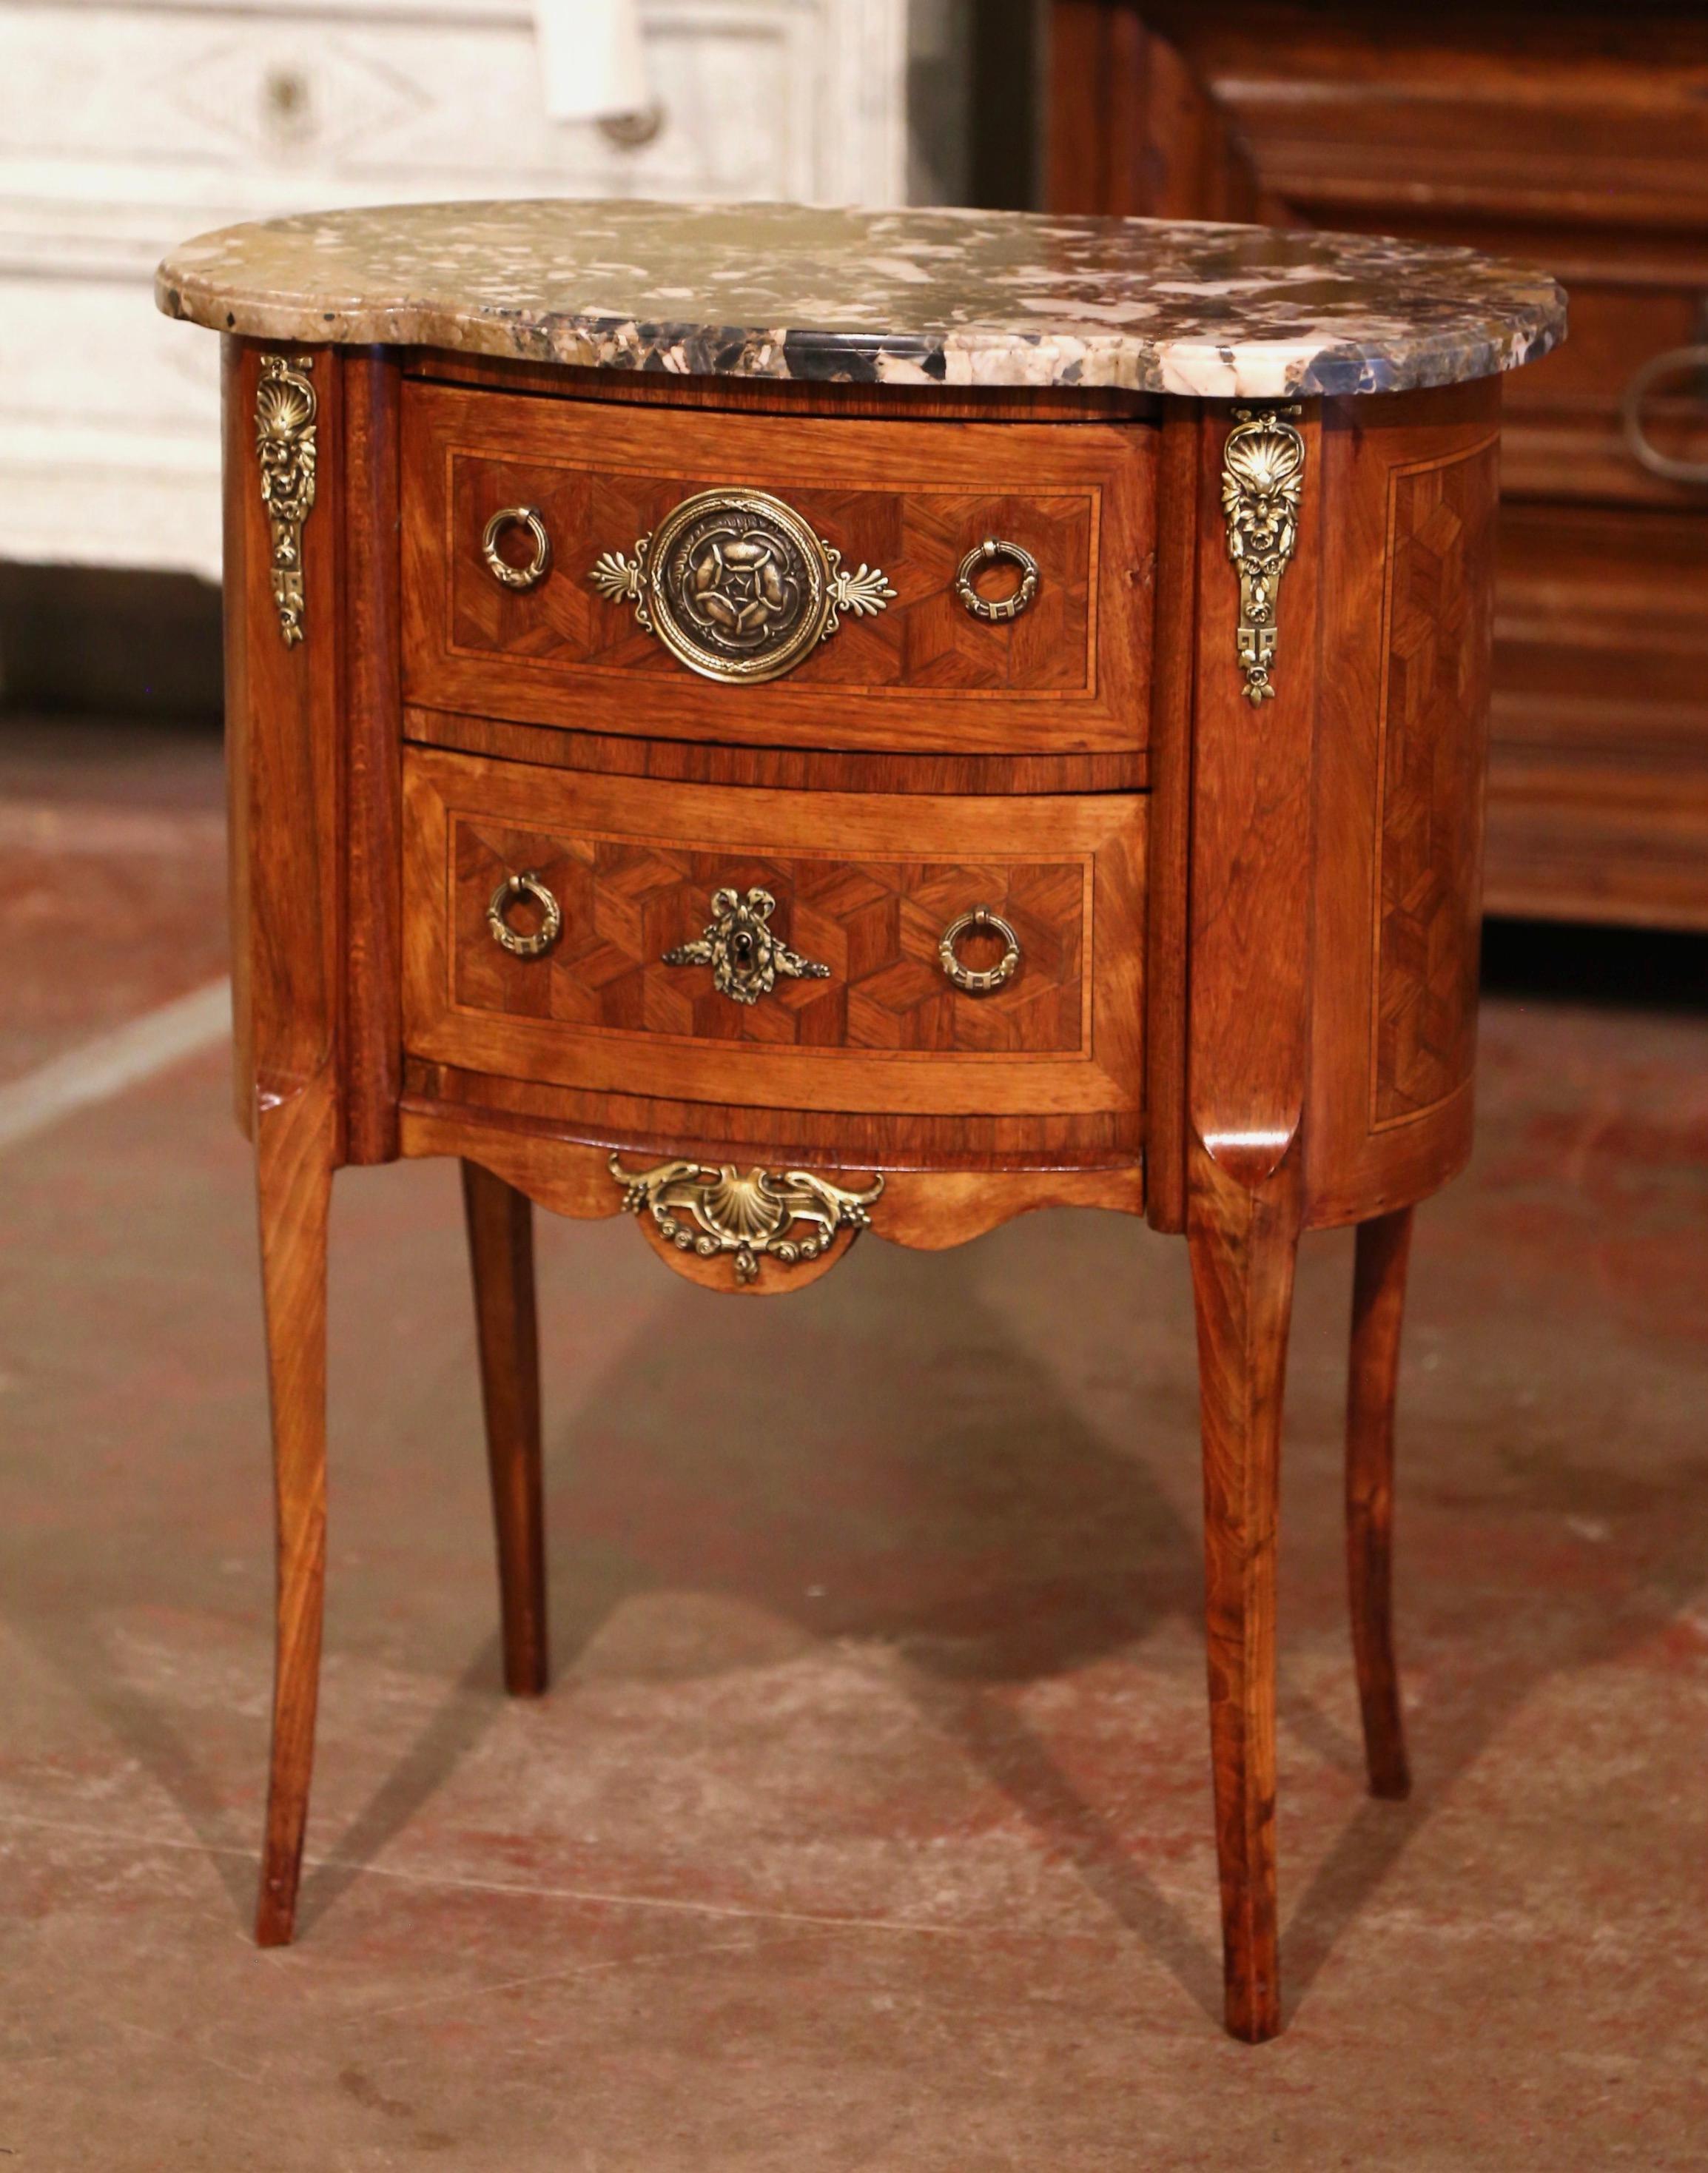 This elegant, kidney-shaped fruitwood antique commode was crafted in France, circa 1950. The commode sits on cabriole legs ending with bronze sabot mounts over the feet. The bow front, over a scalloped apron embellished with a center decorative